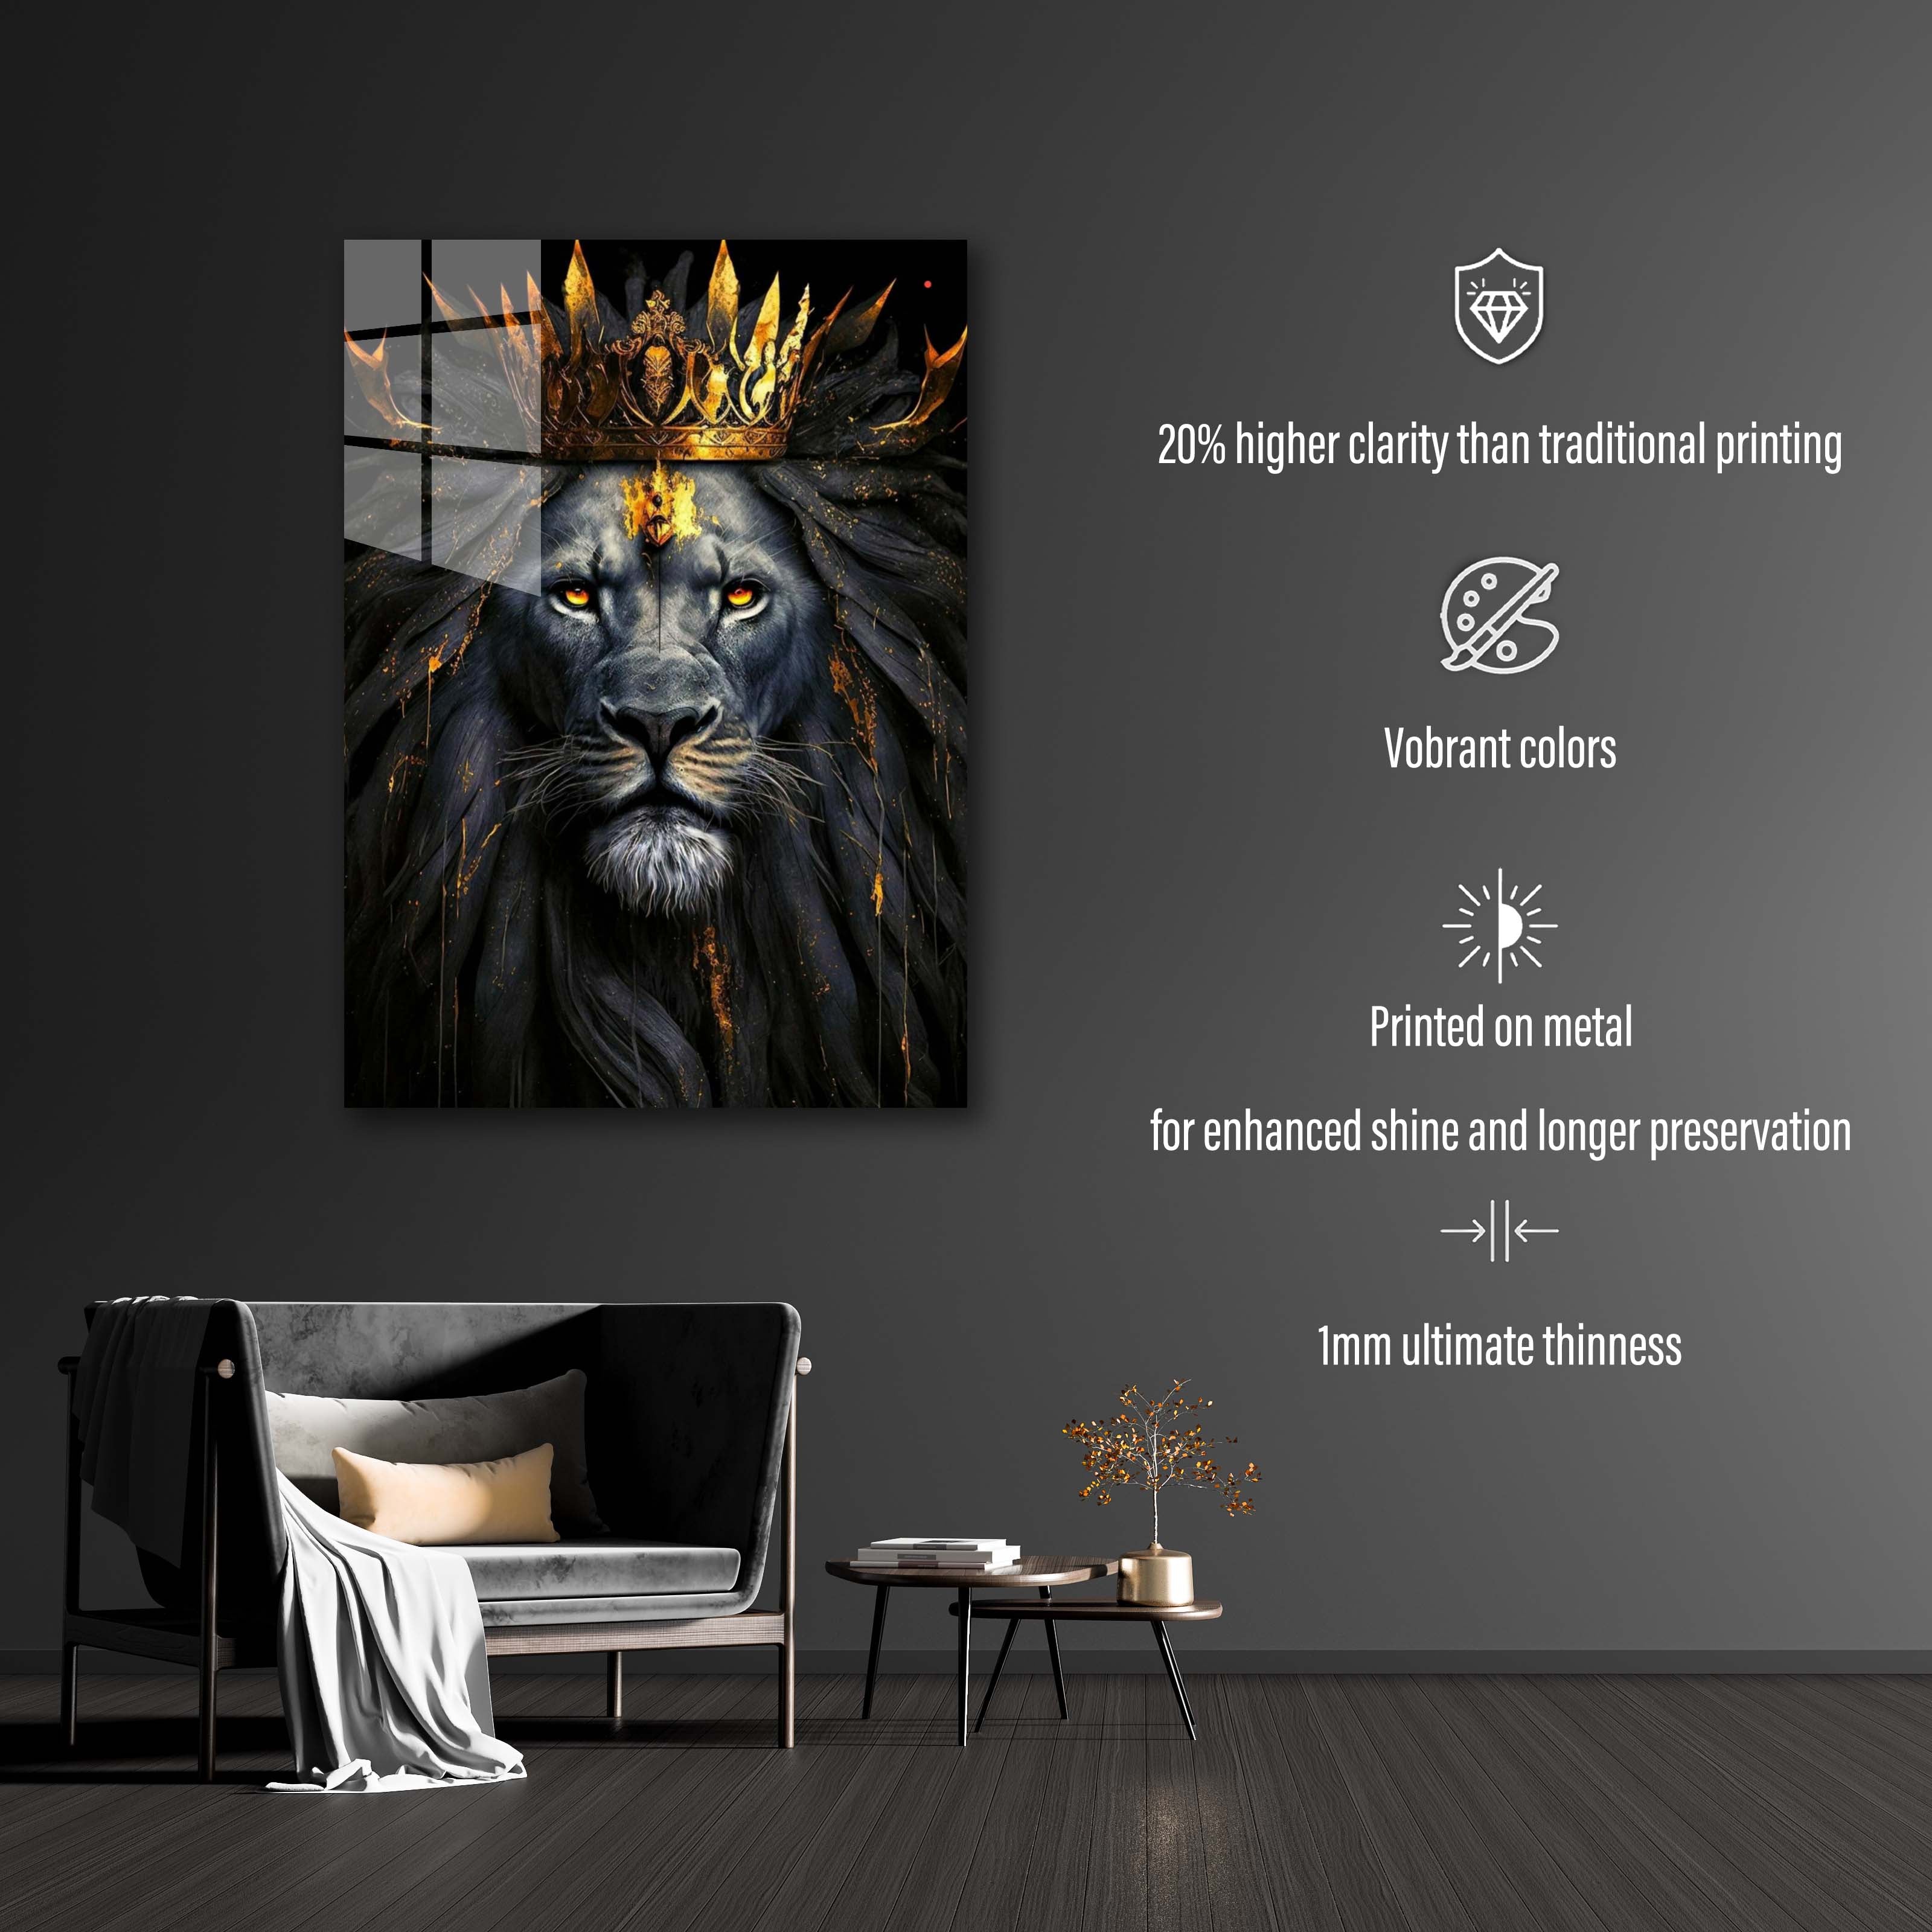 King Lion Head-designed by @Puffy Design